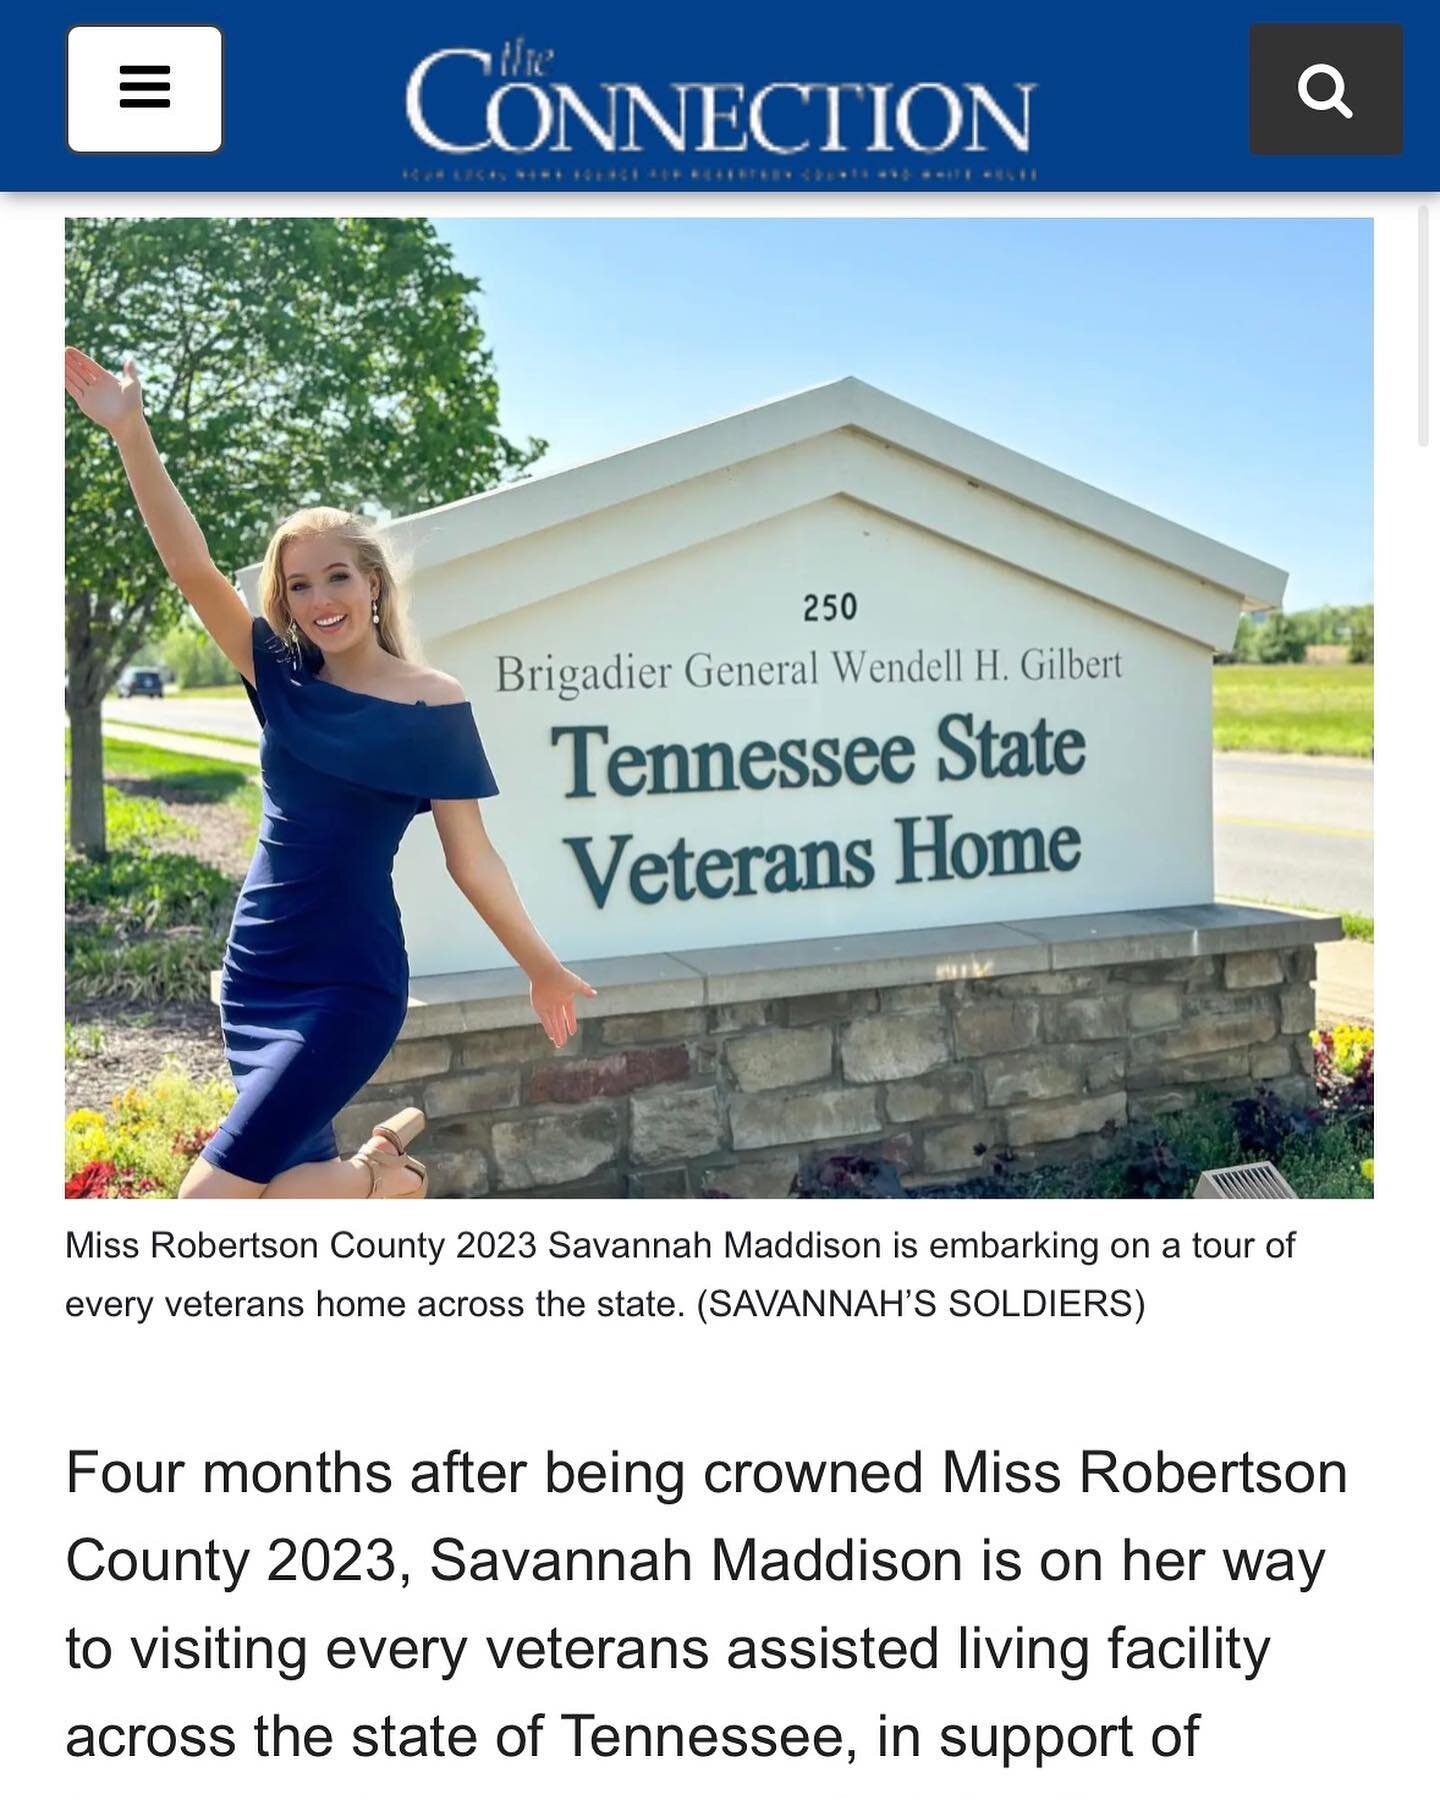 Thank you Robertson County Connection for publishing this interview! So excited to continue our work with TN, AL, and KY Veterans this month!💙 #savannahssoldiers #savannahmaddison #veteransupport